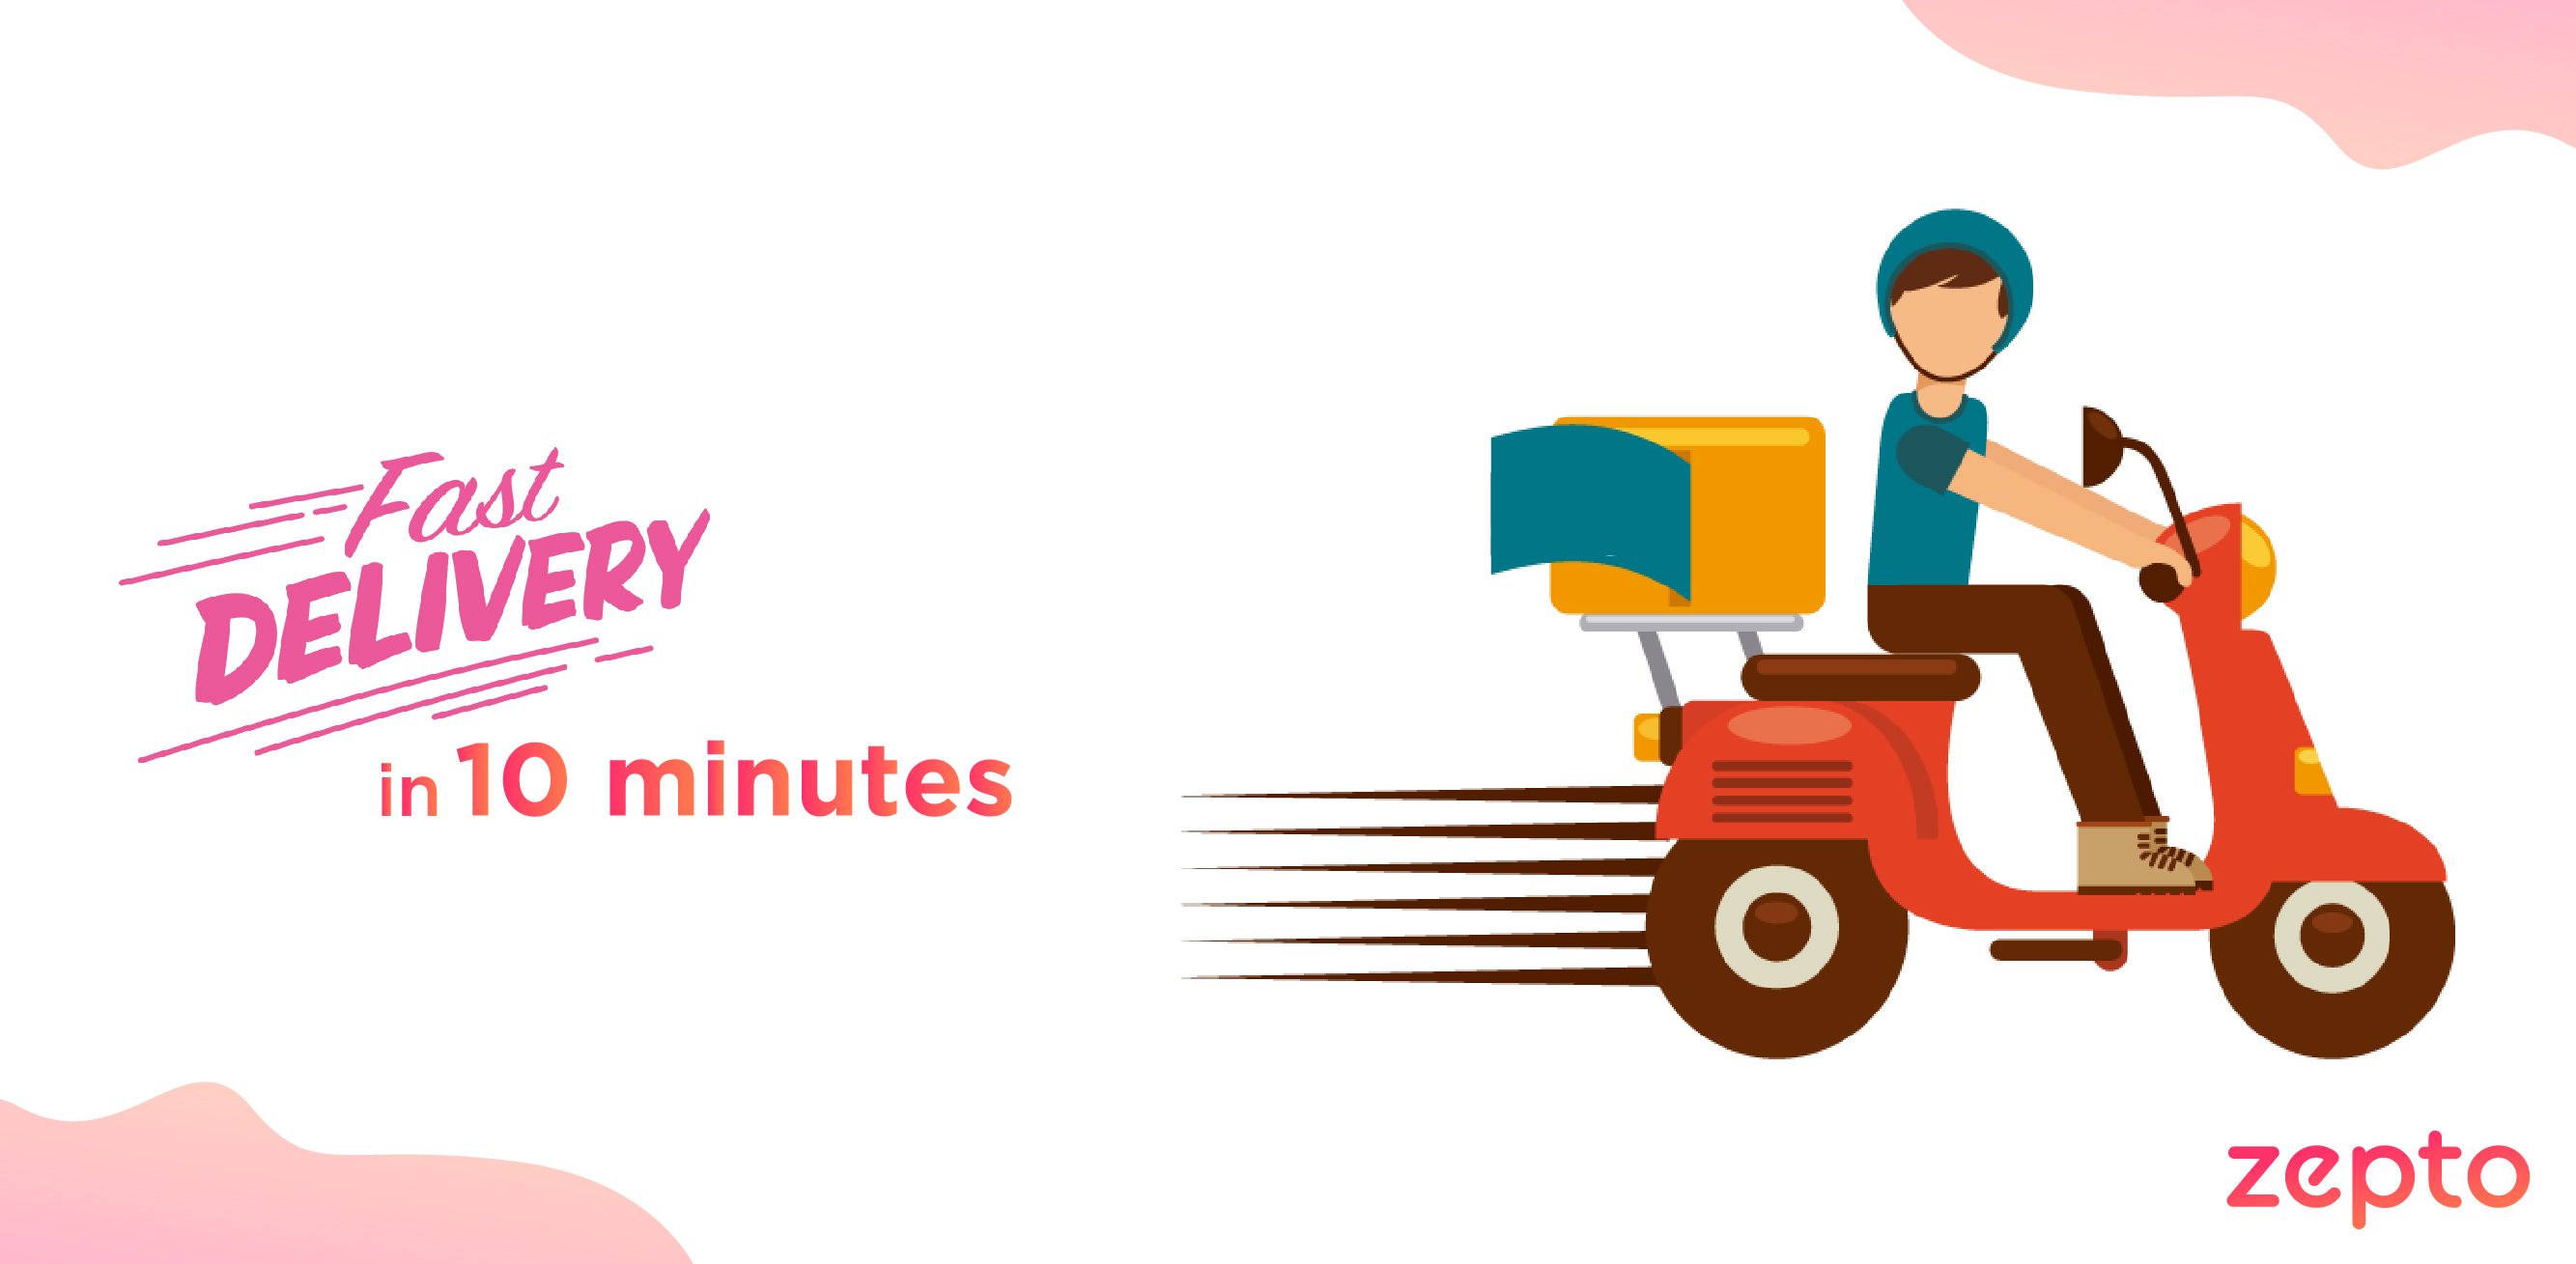 How Does Zepto Deliver Groceries In 10 Minutes?